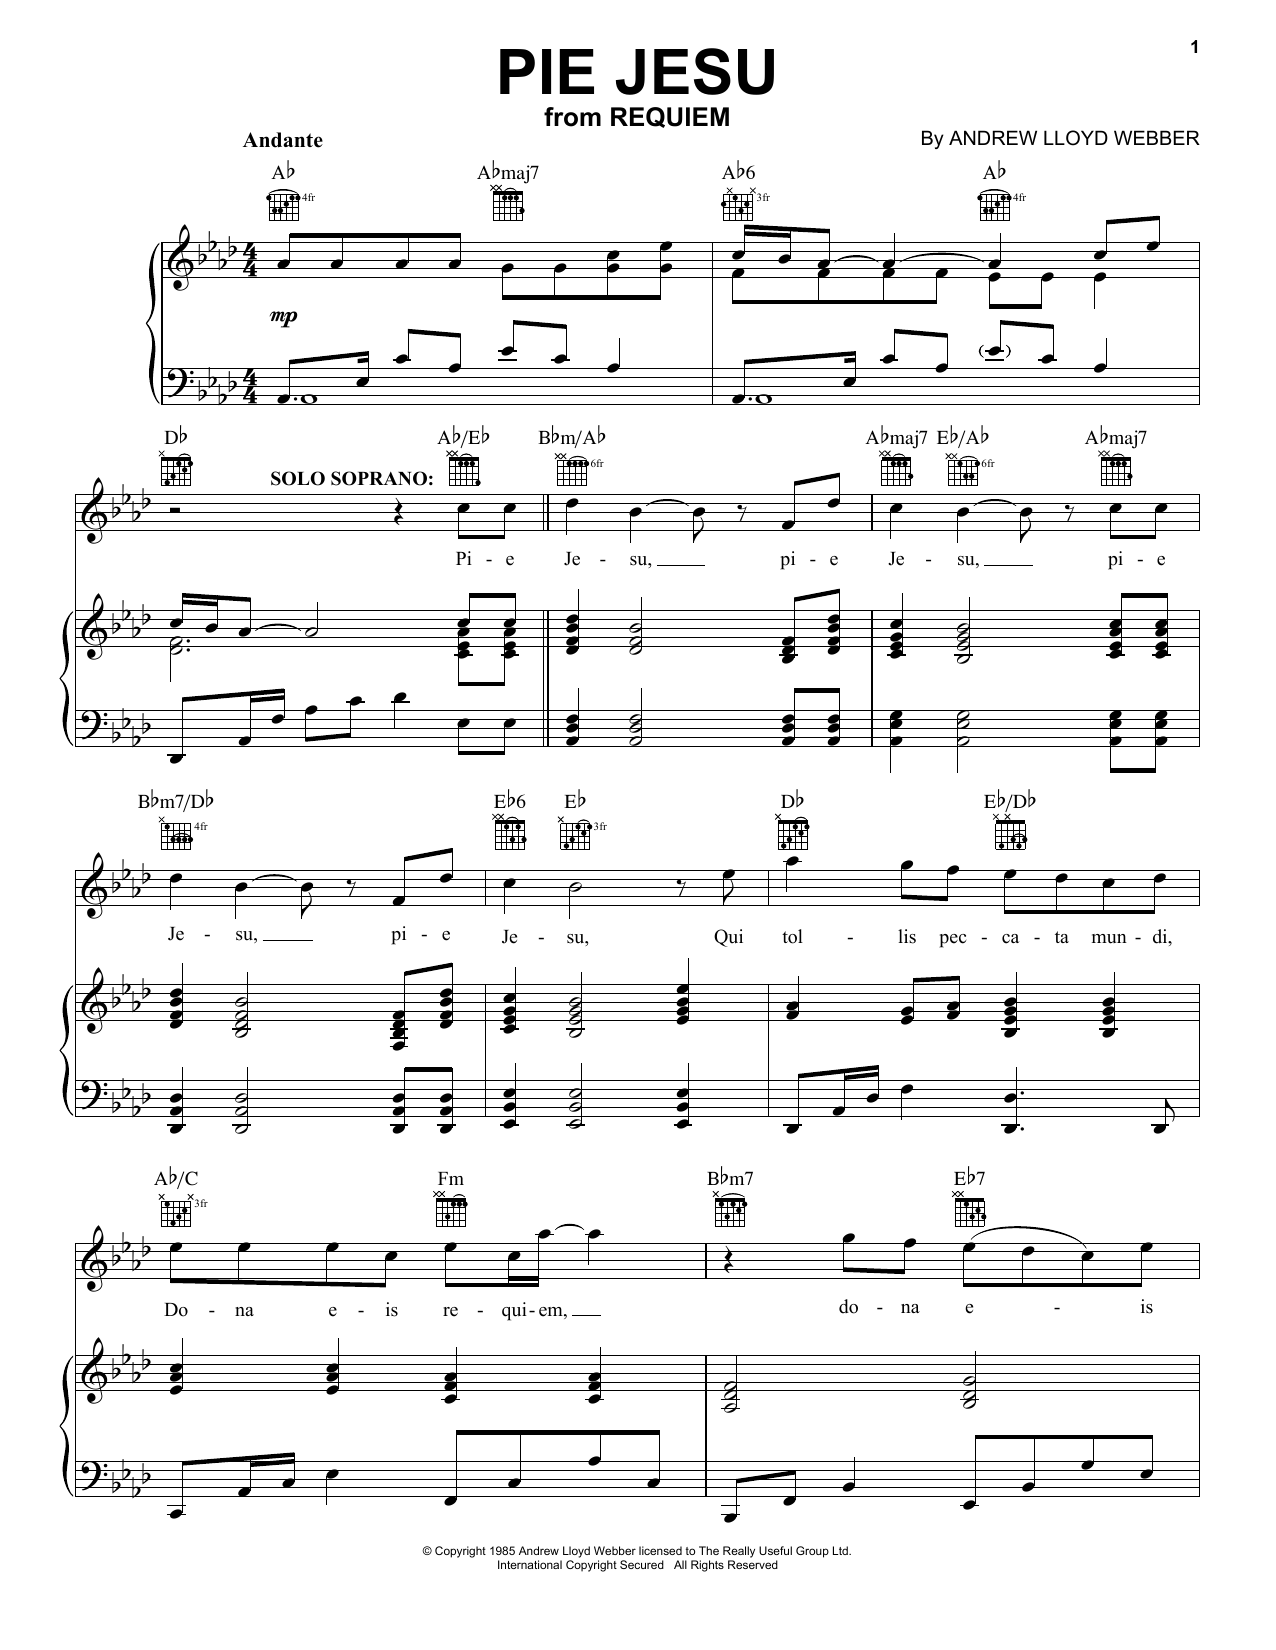 Andrew Lloyd Webber Pie Jesu (from Requiem) sheet music preview music notes and score for Piano including 2 page(s)